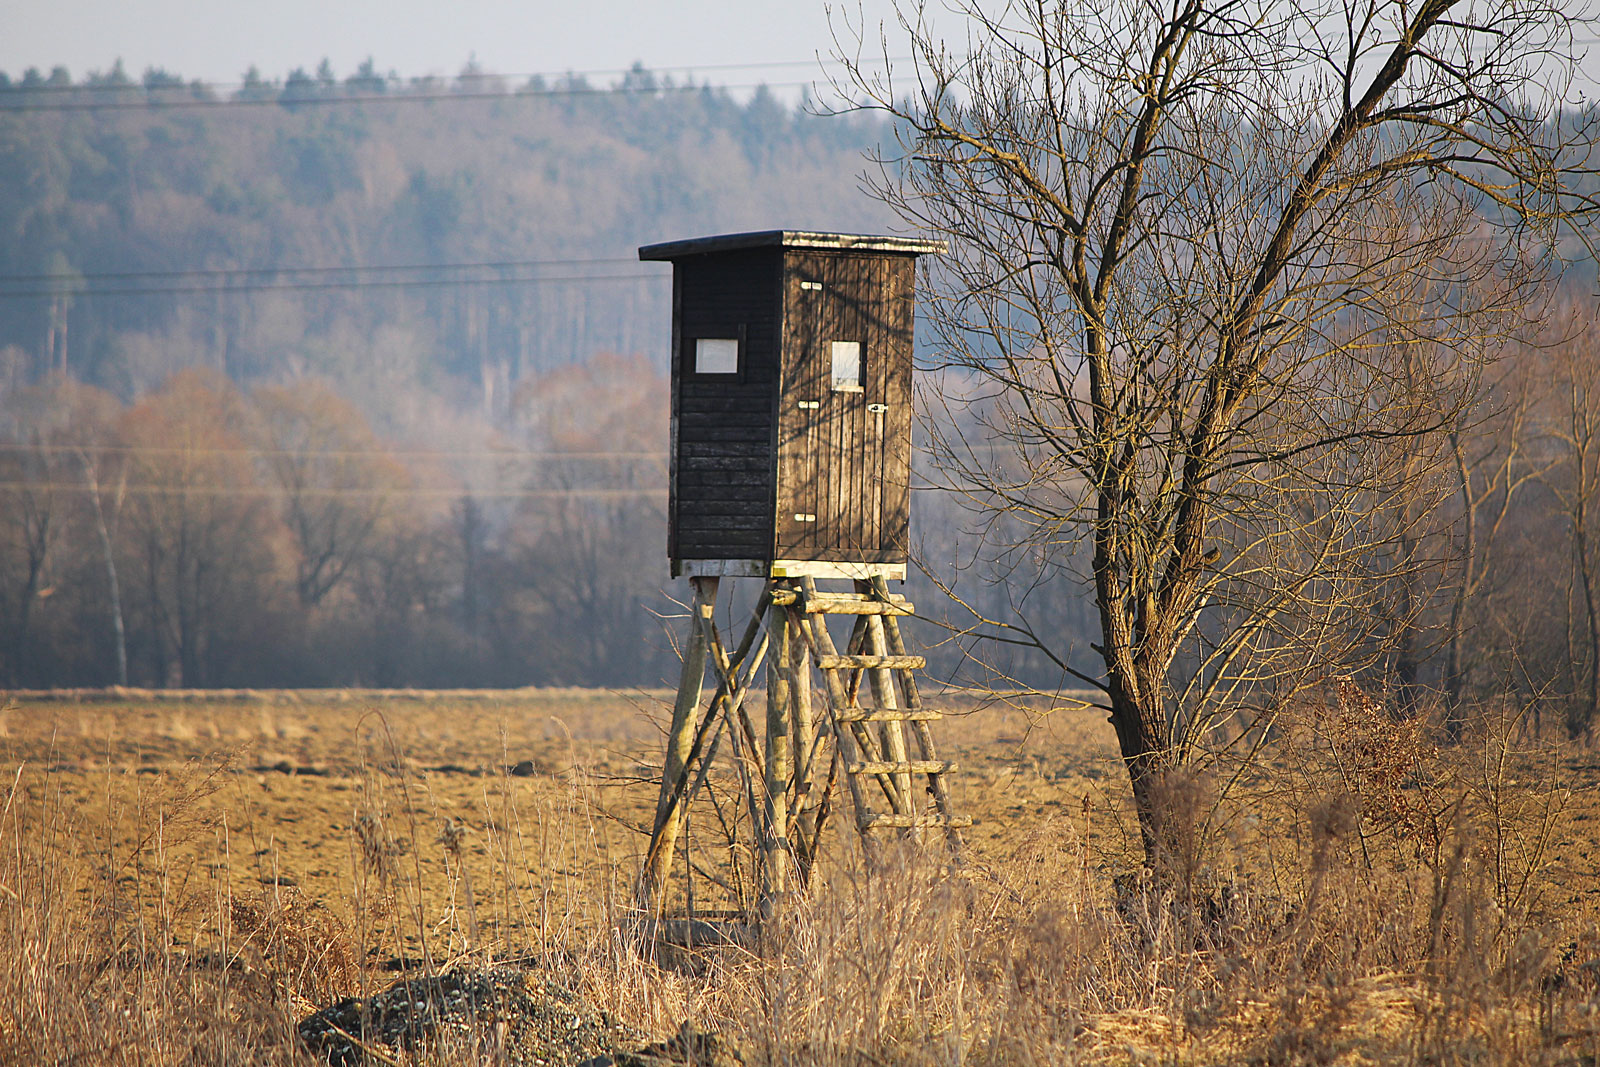 Deer Blind 1 25 States Took Additional Steps to Fight Chronic Wasting Disease in the Past Year | Theodore Roosevelt Conservation Partnership